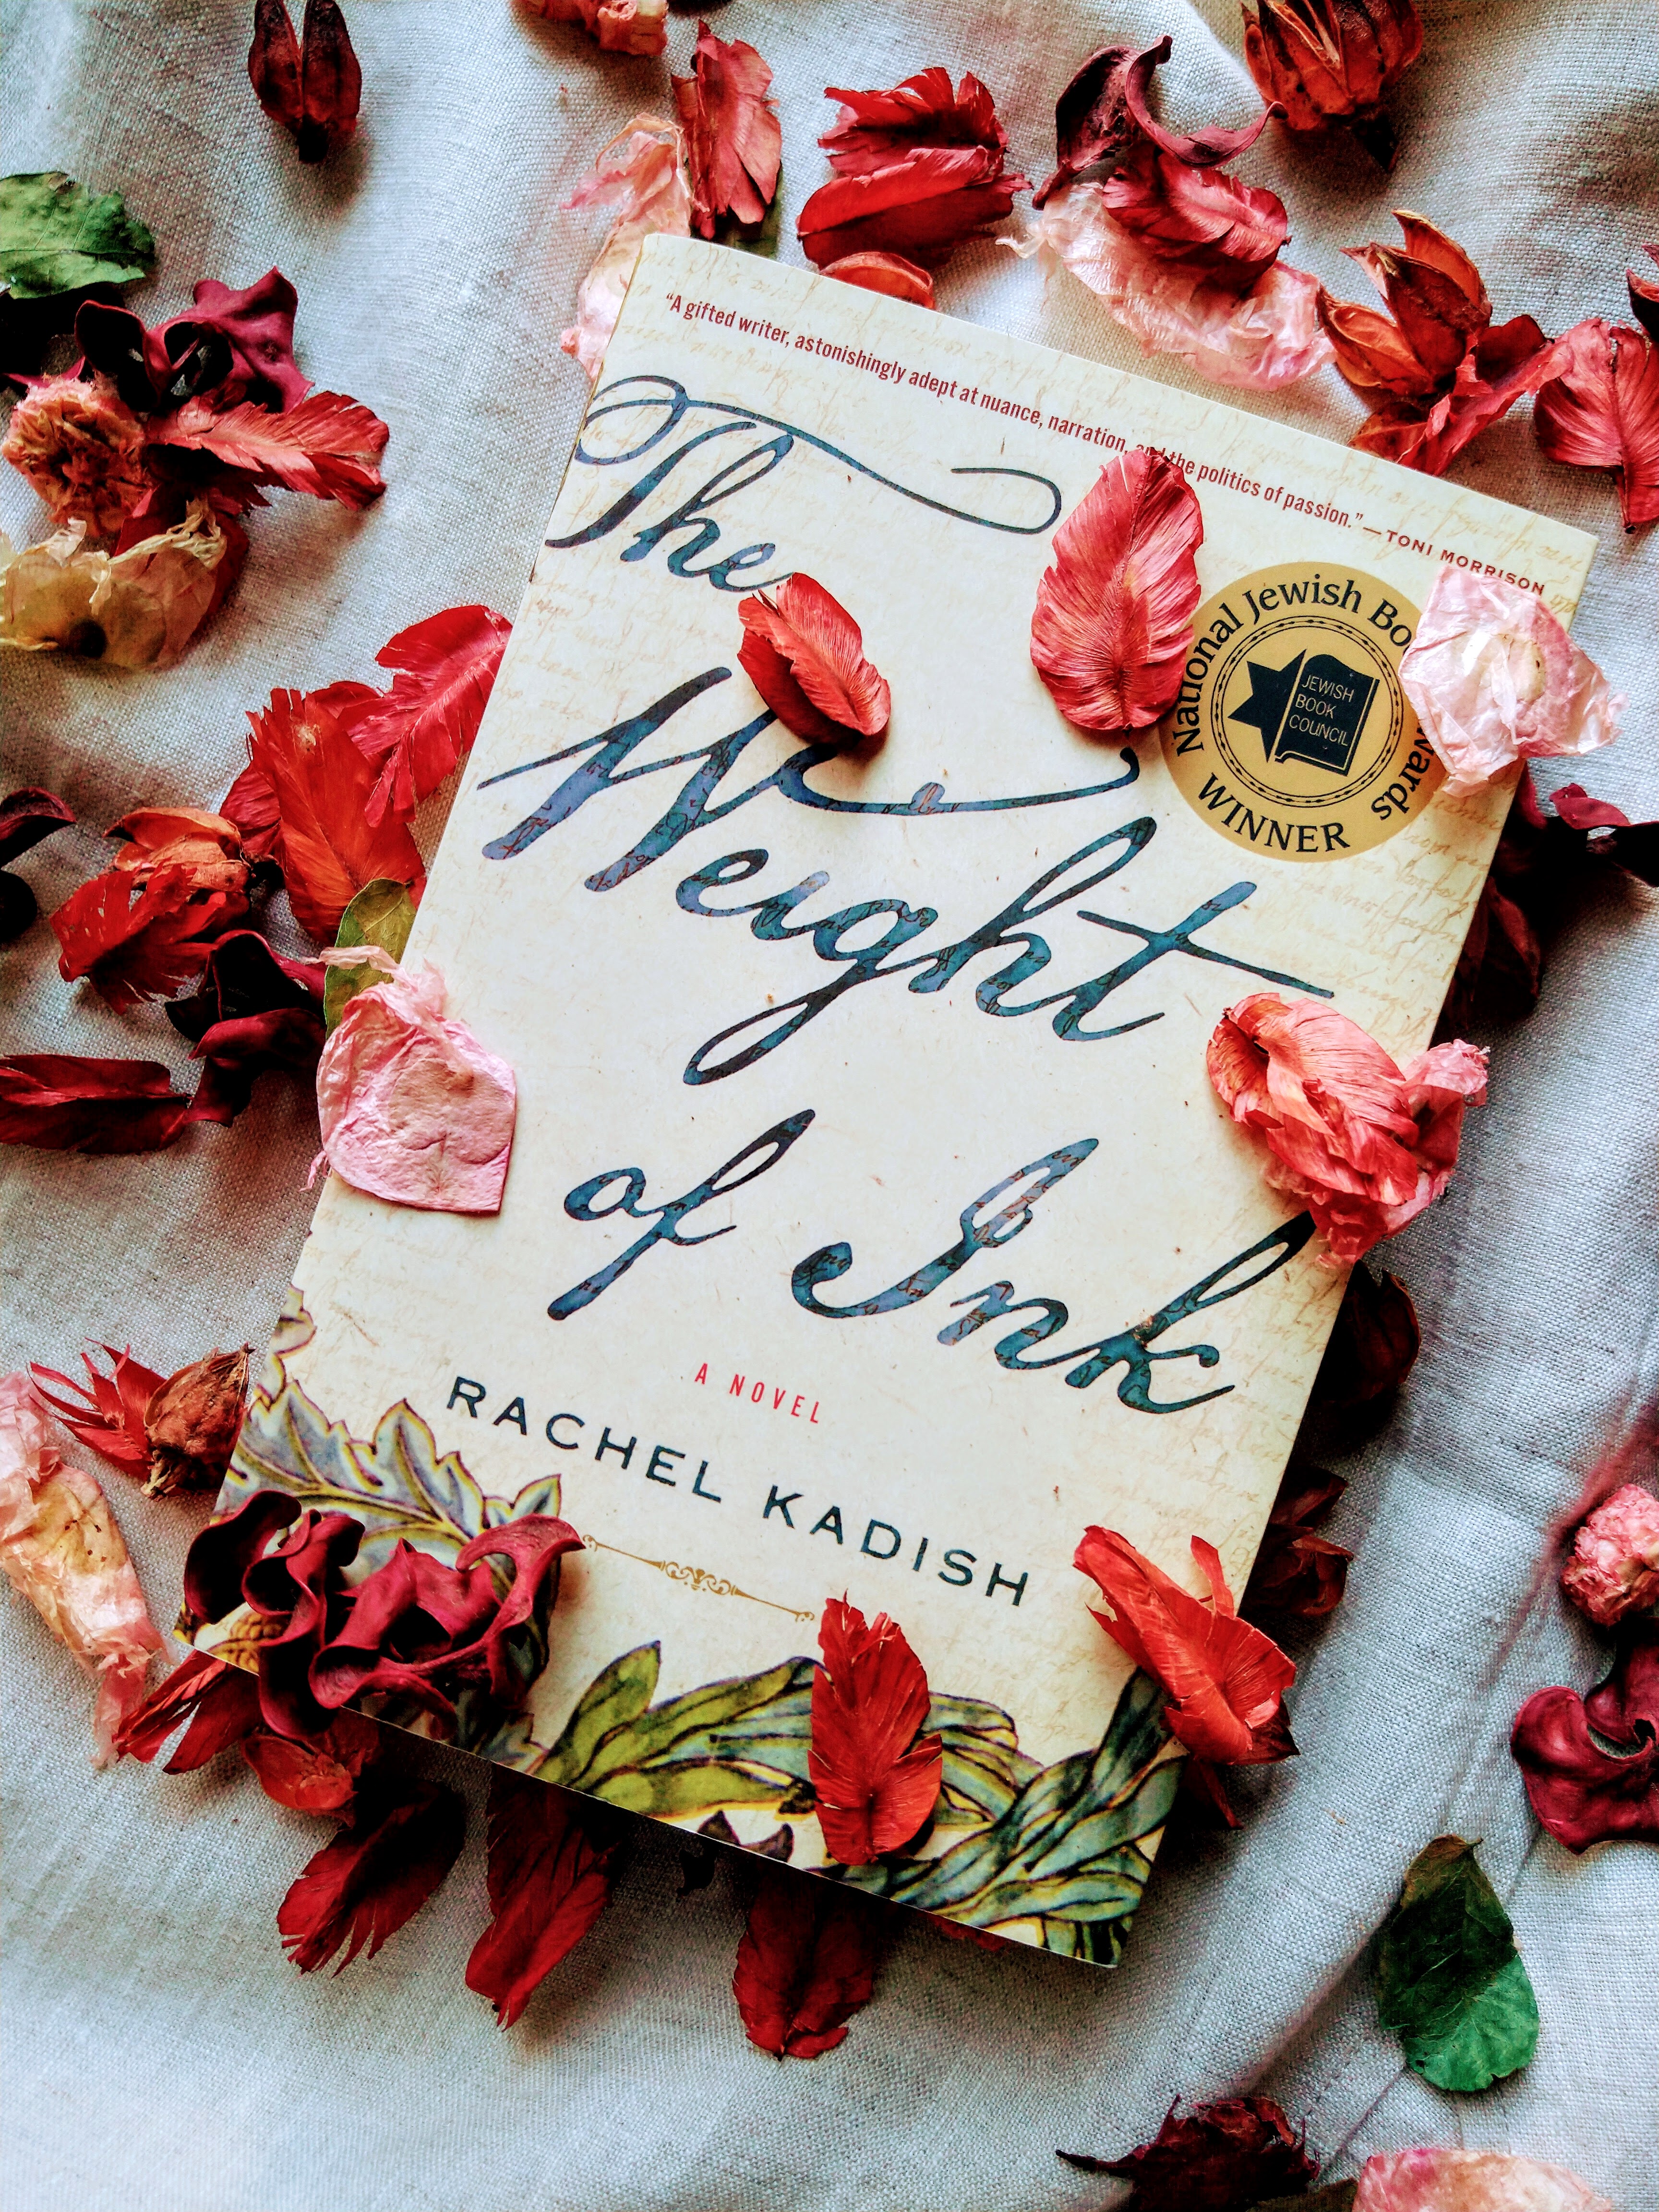 Sincerely Loree: The Weight of Ink by Rachel Kadish